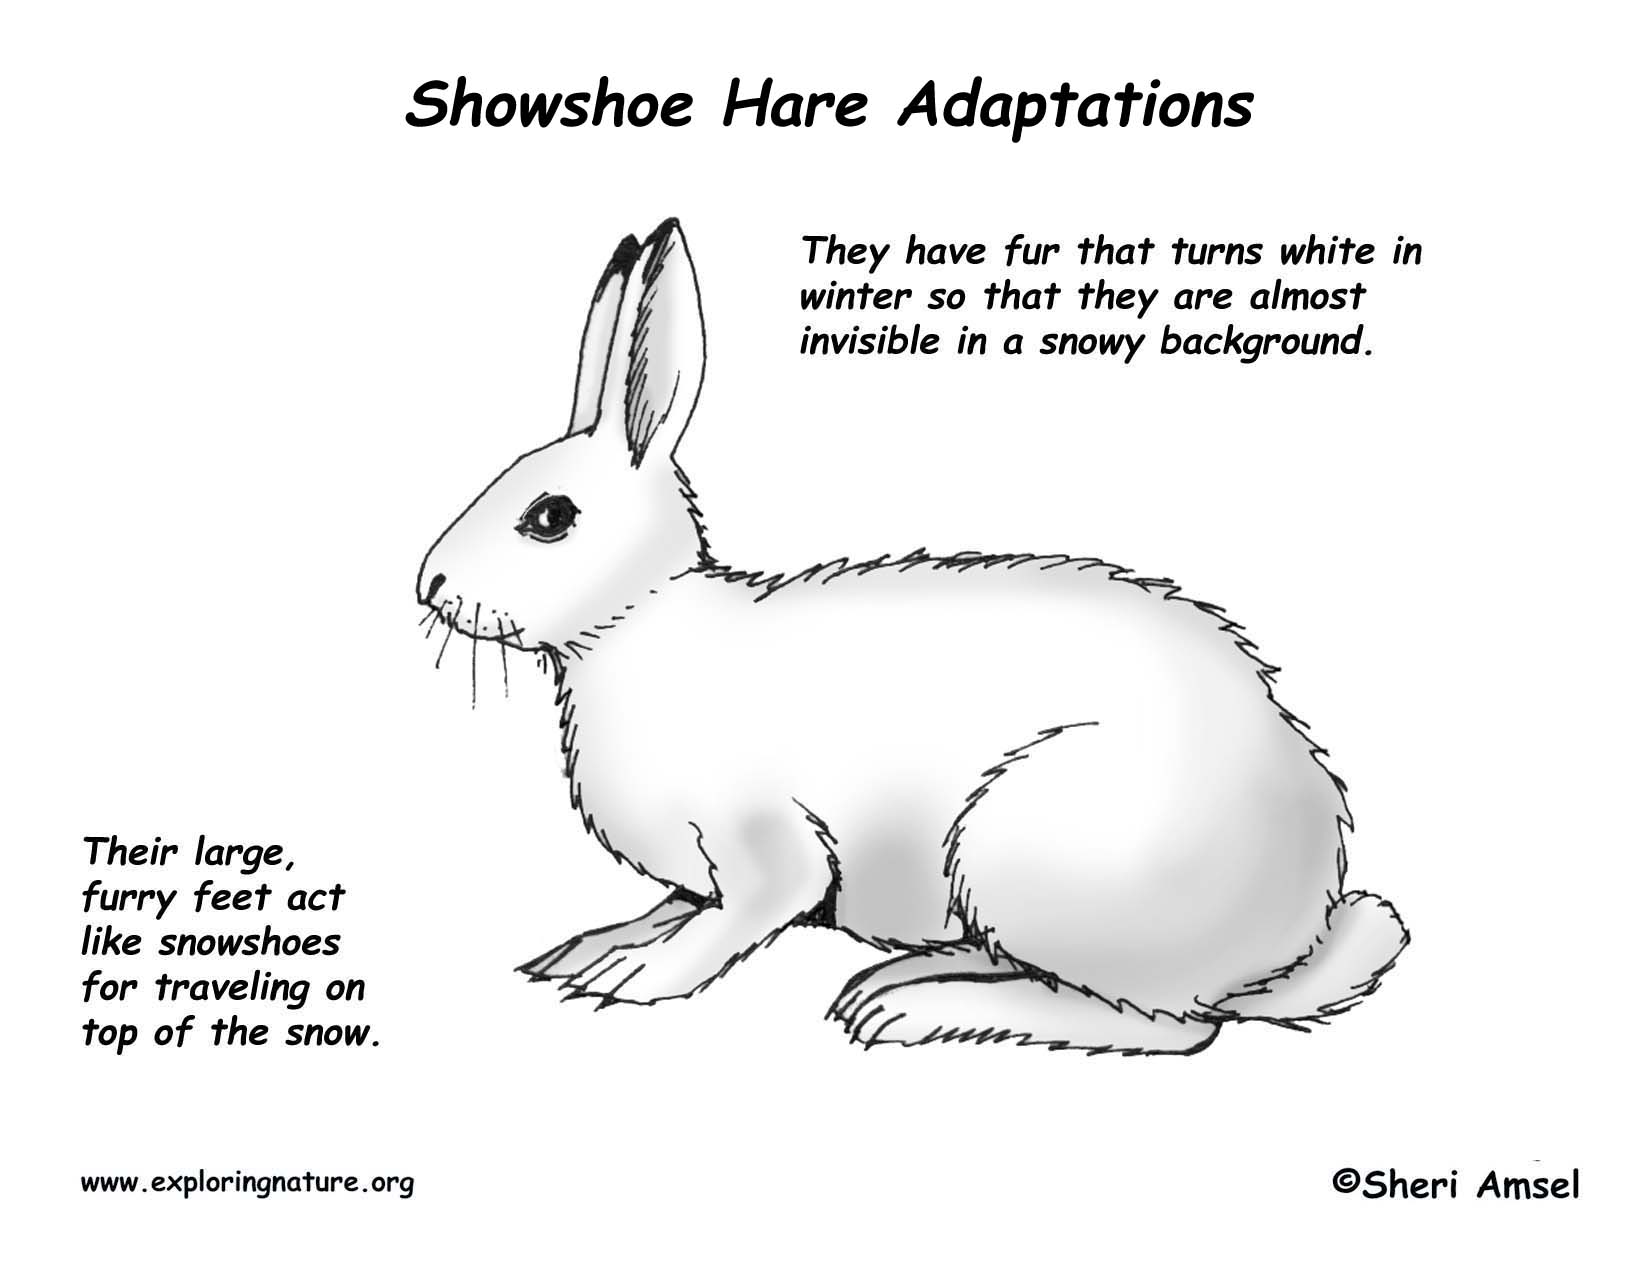 Adaptations of the Snowshoe Hare